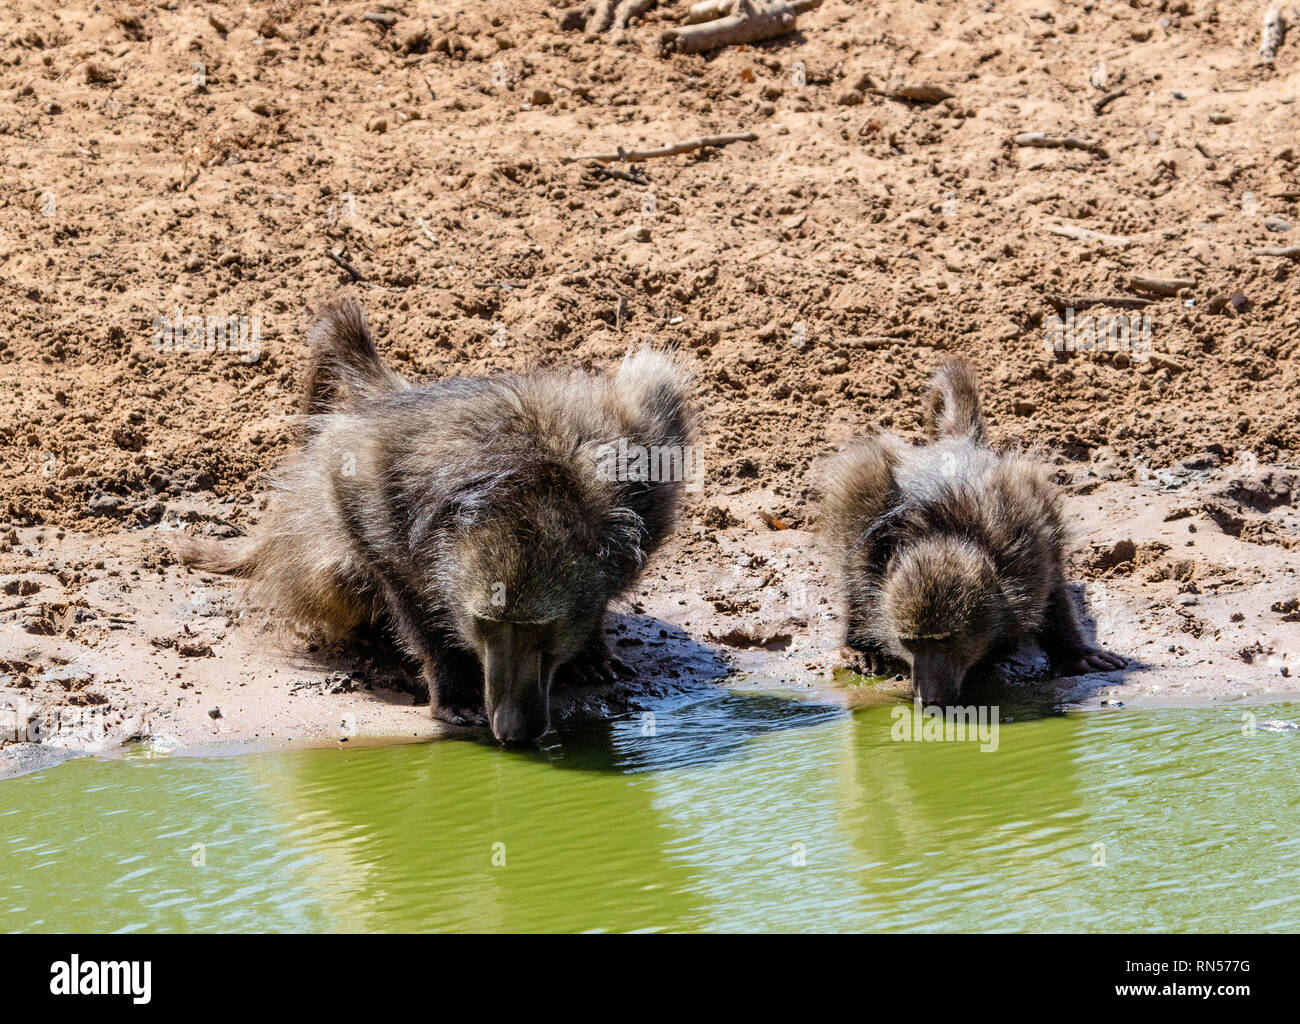 two monkeys drink in a pool of water Stock Photo